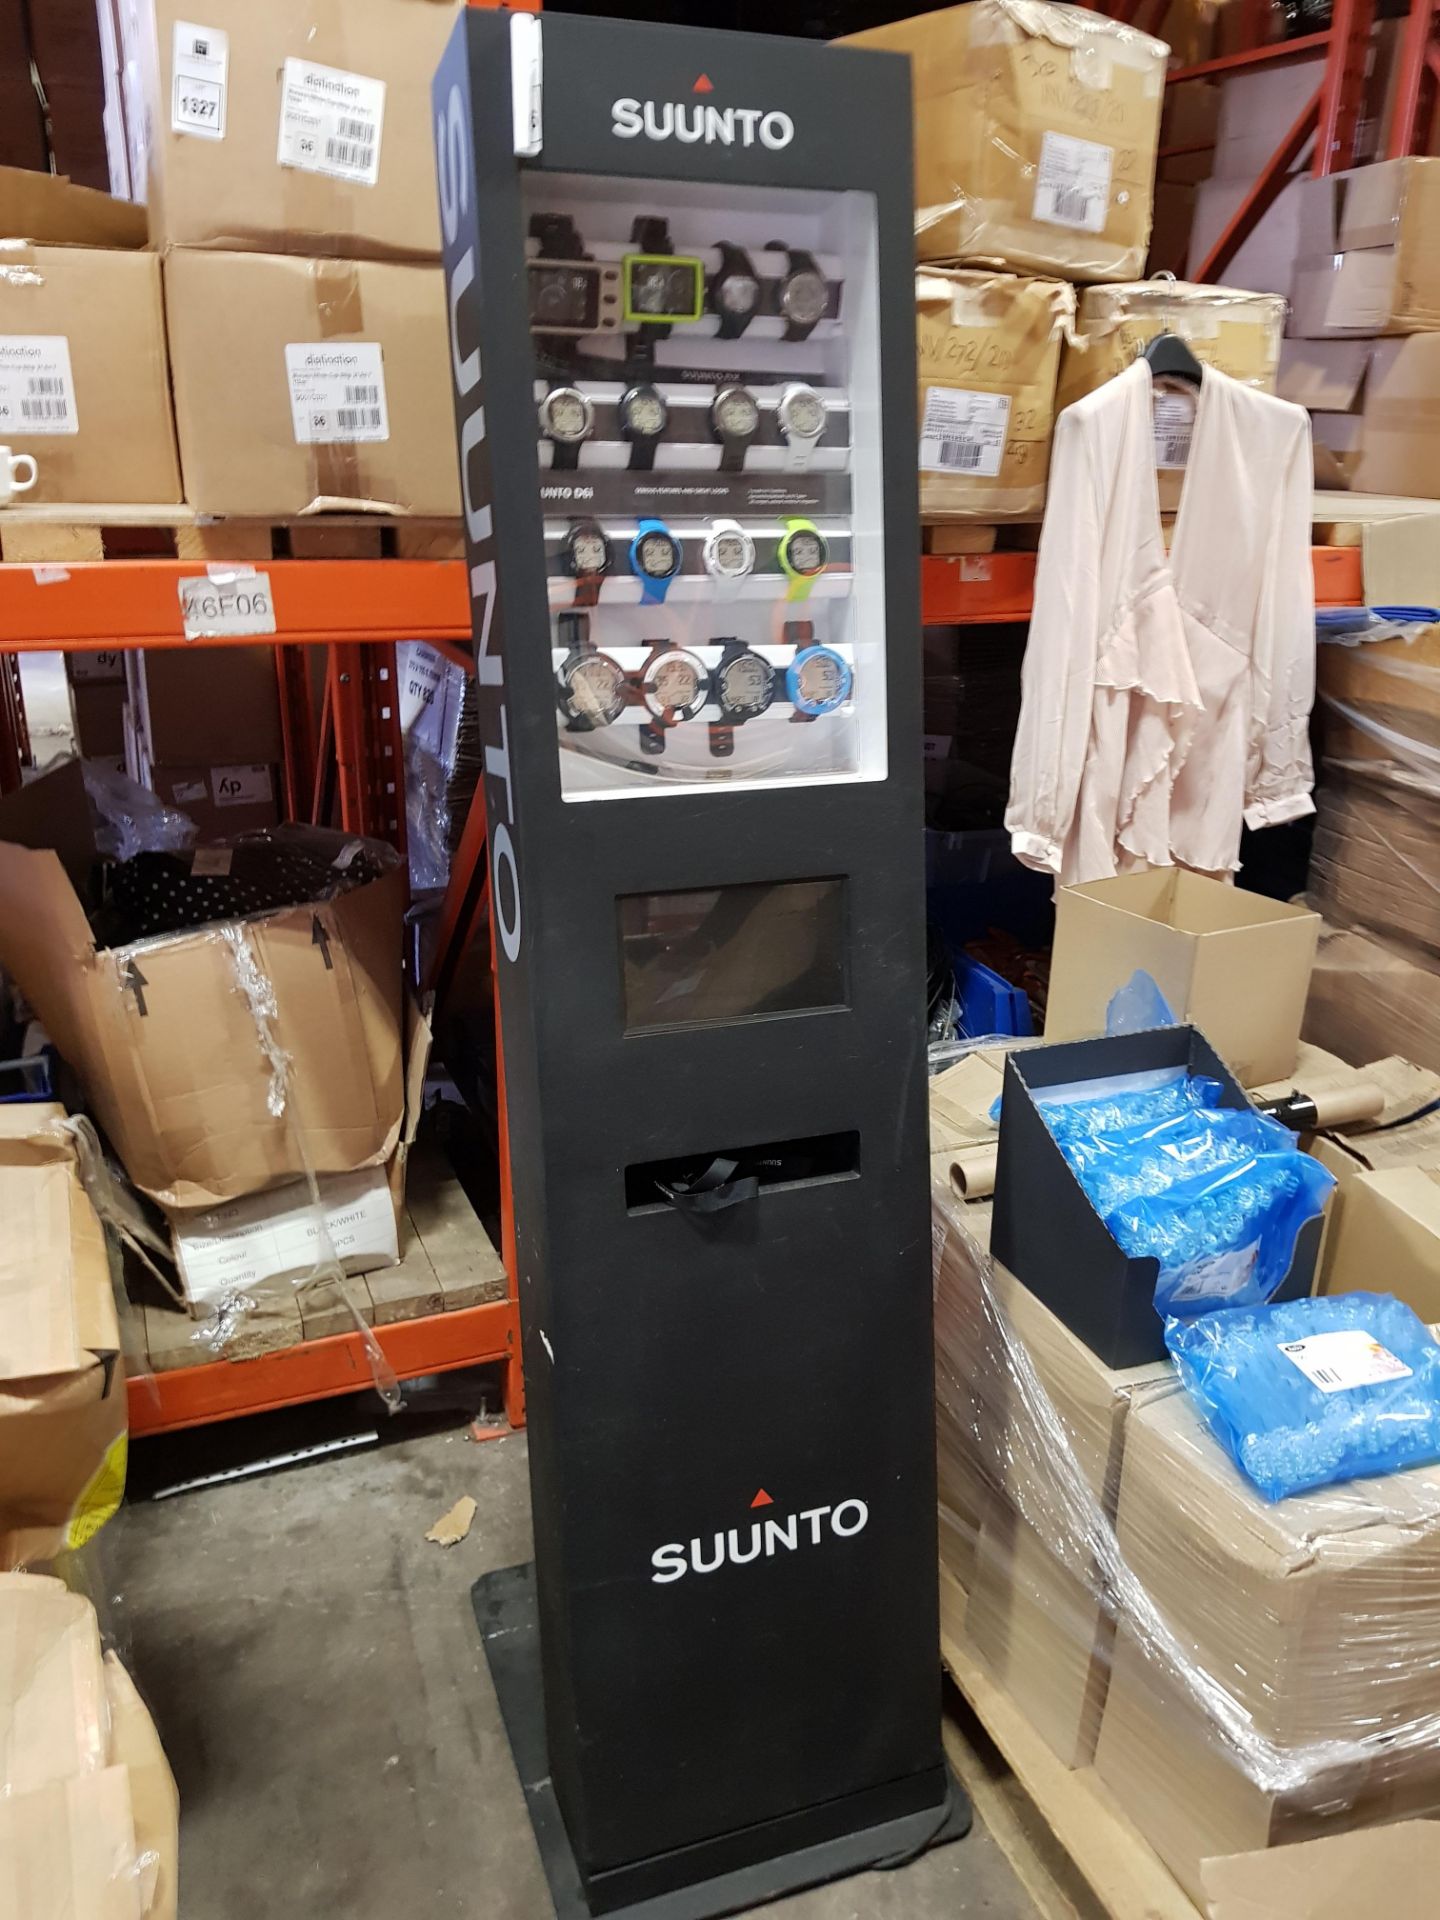 1 X SUUNTO WATCH DISPLAY STAND WITH 16 X DEMONSTRATION WATCHES